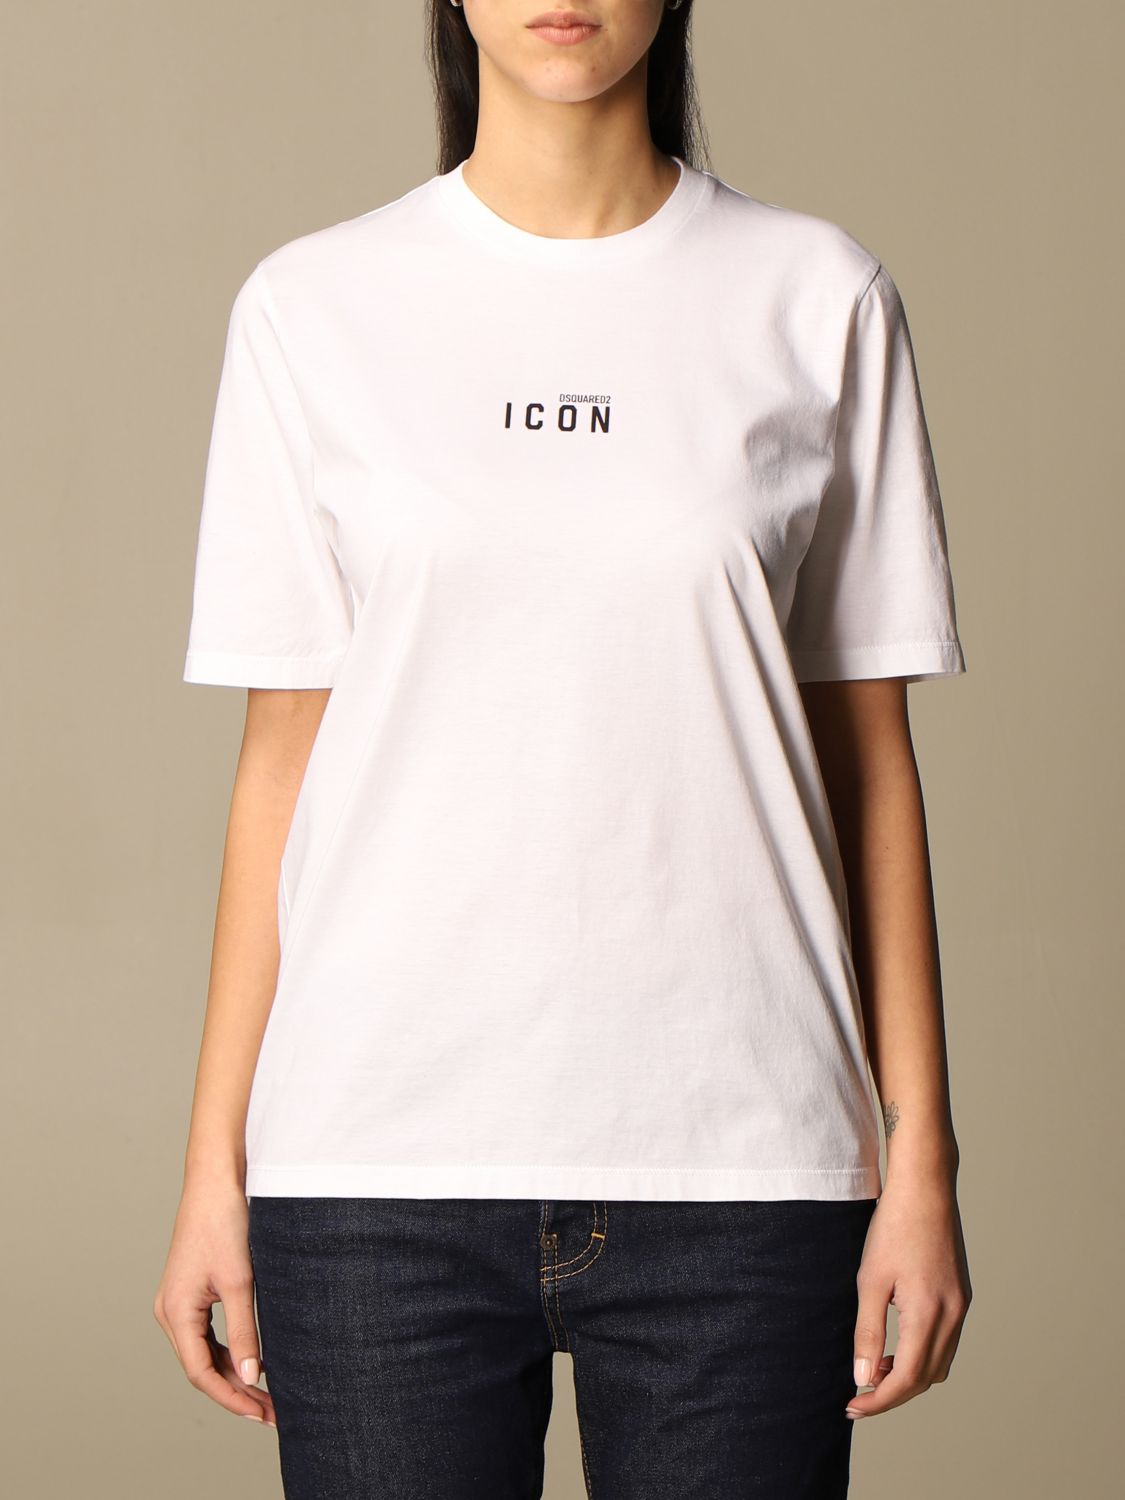 DSQUARED2: cotton t-shirt with logo - White | Dsquared2 t-shirt ...